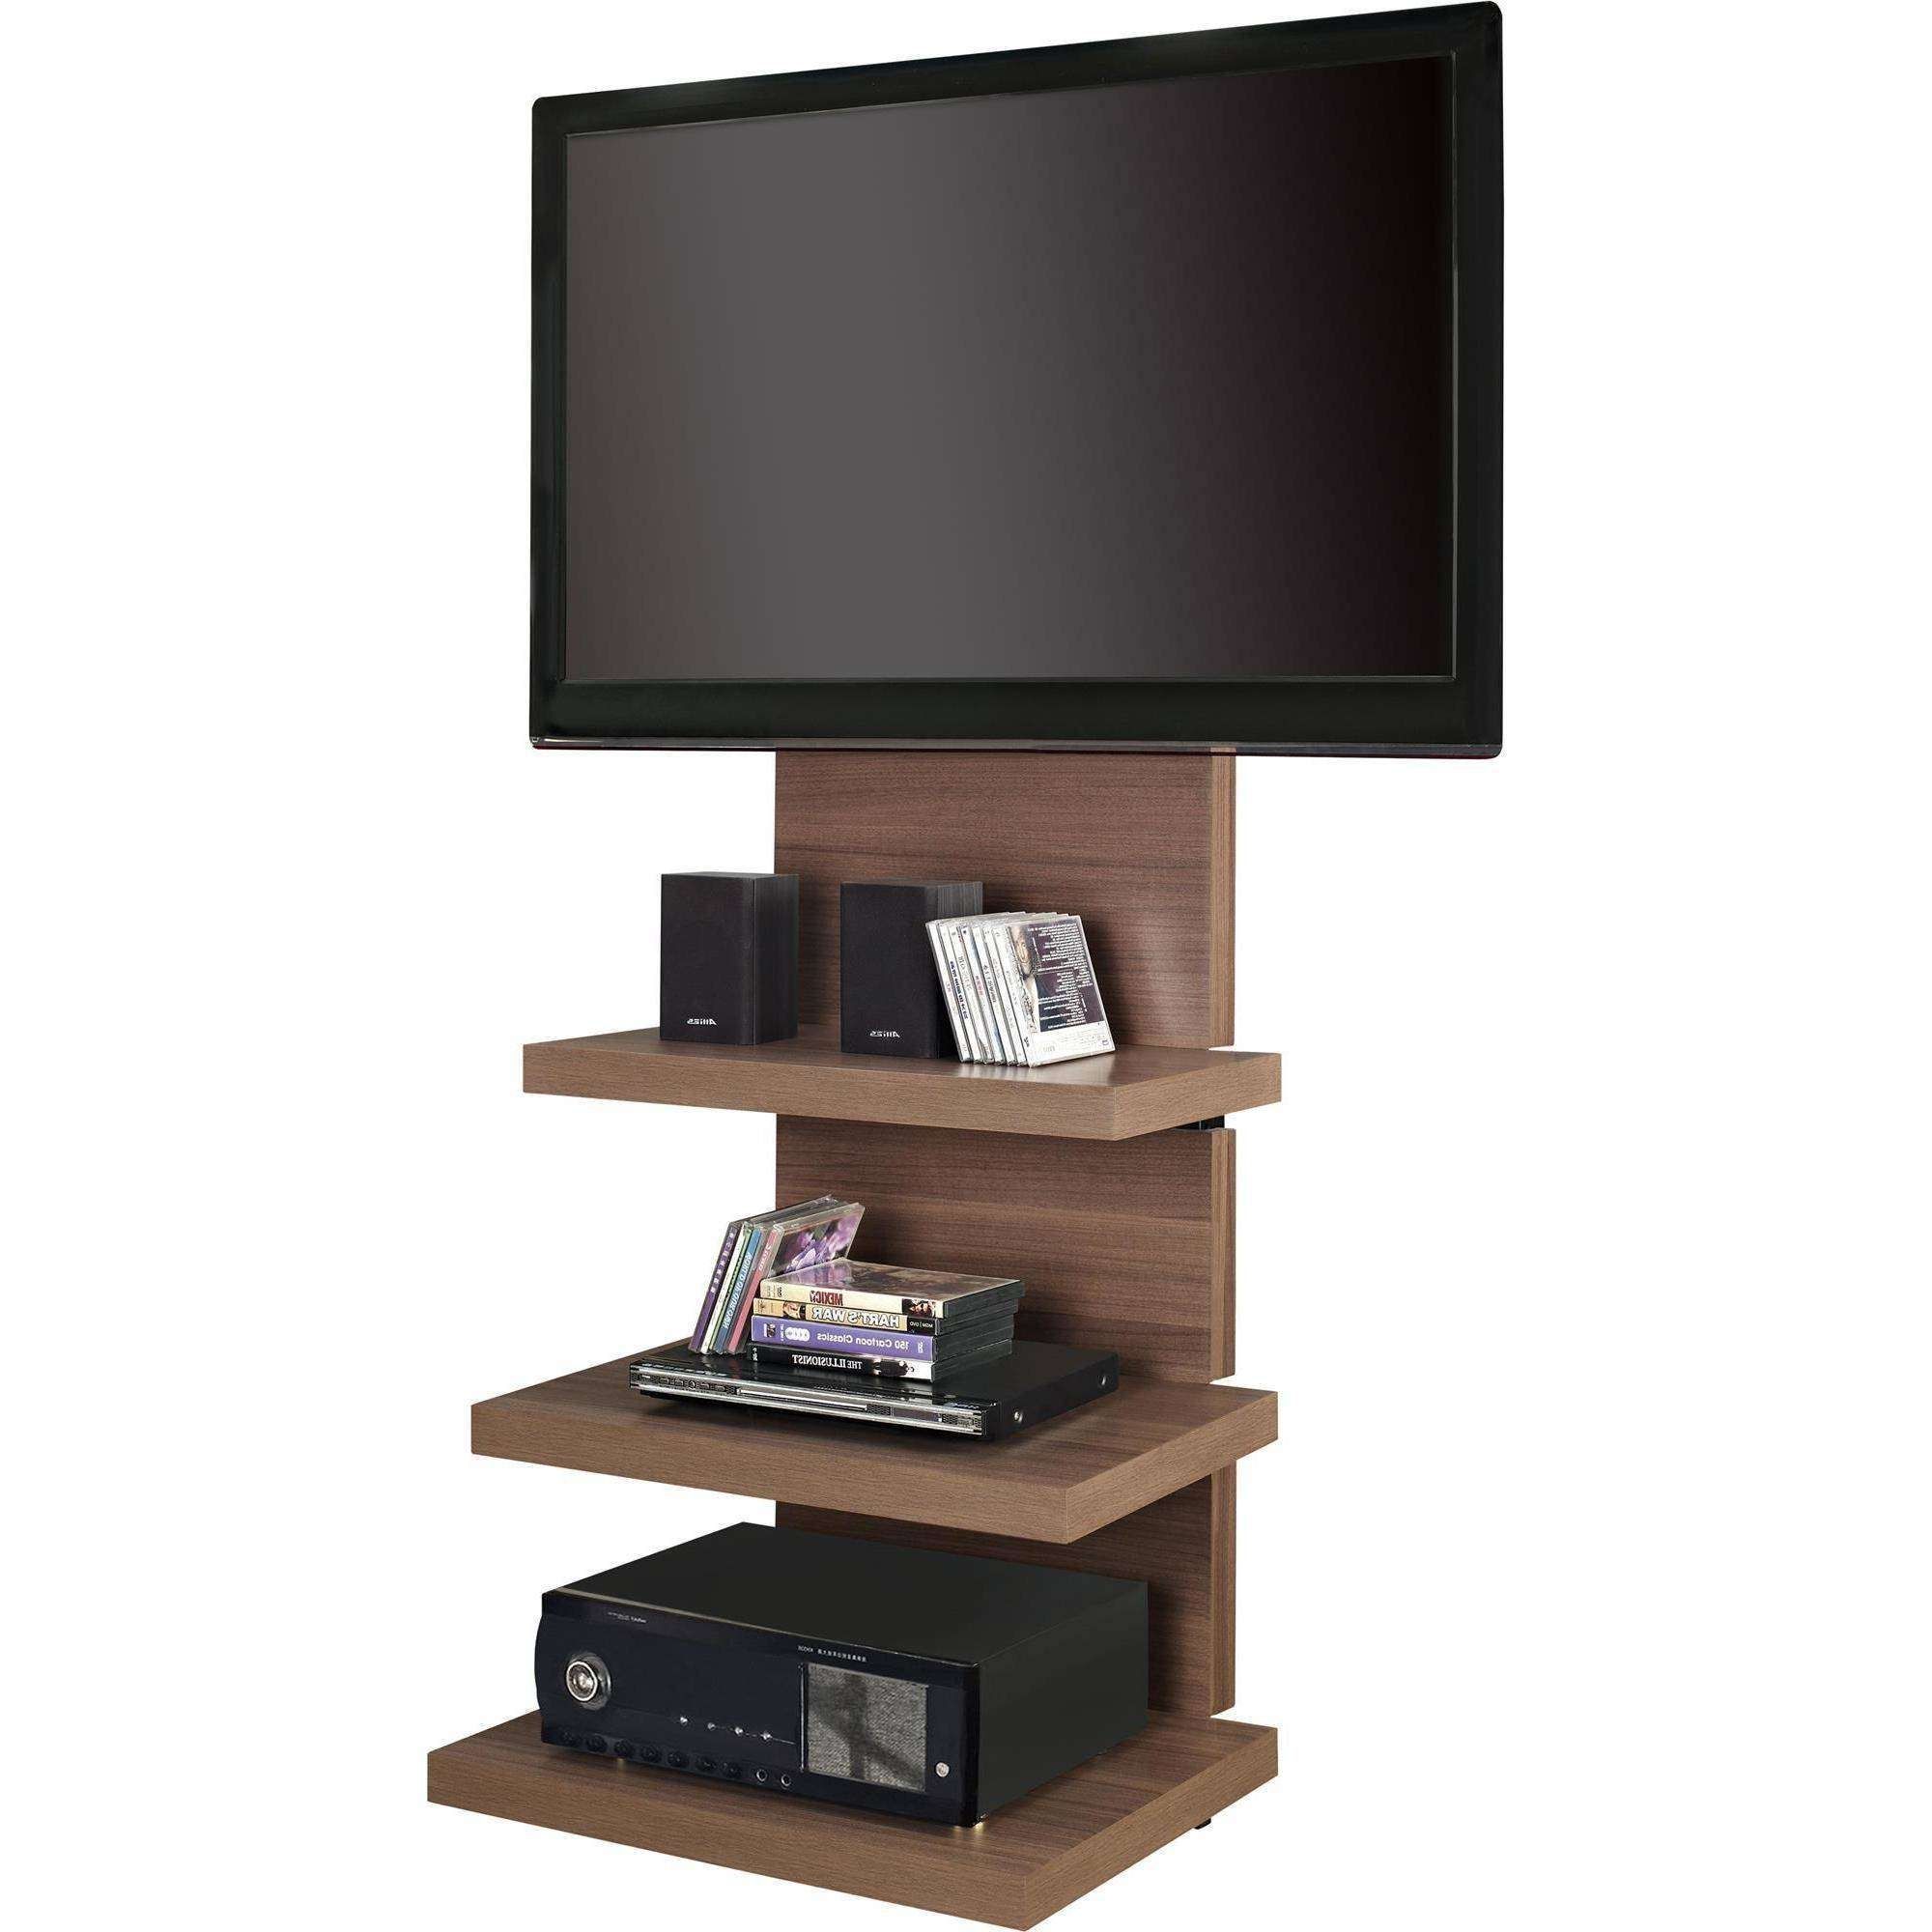 Altra Wall Mount Tv Stand With 3 Shelves, For Tvs Up To 60" | Ebay Throughout Wall Mounted Tv Stands With Shelves (Gallery 2 of 15)